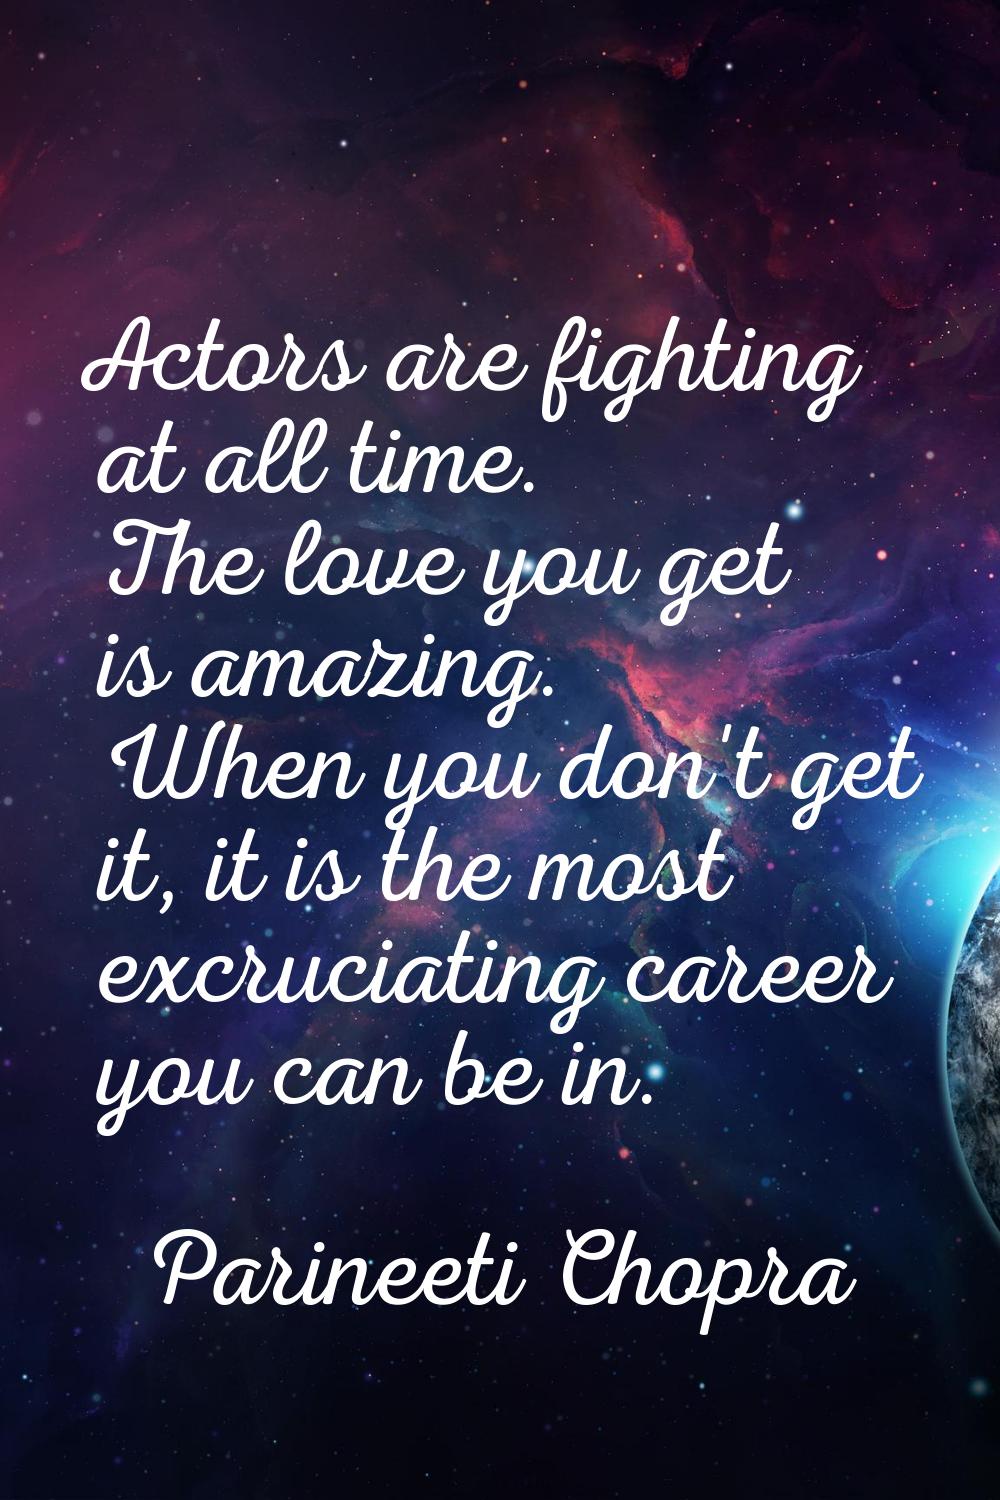 Actors are fighting at all time. The love you get is amazing. When you don't get it, it is the most